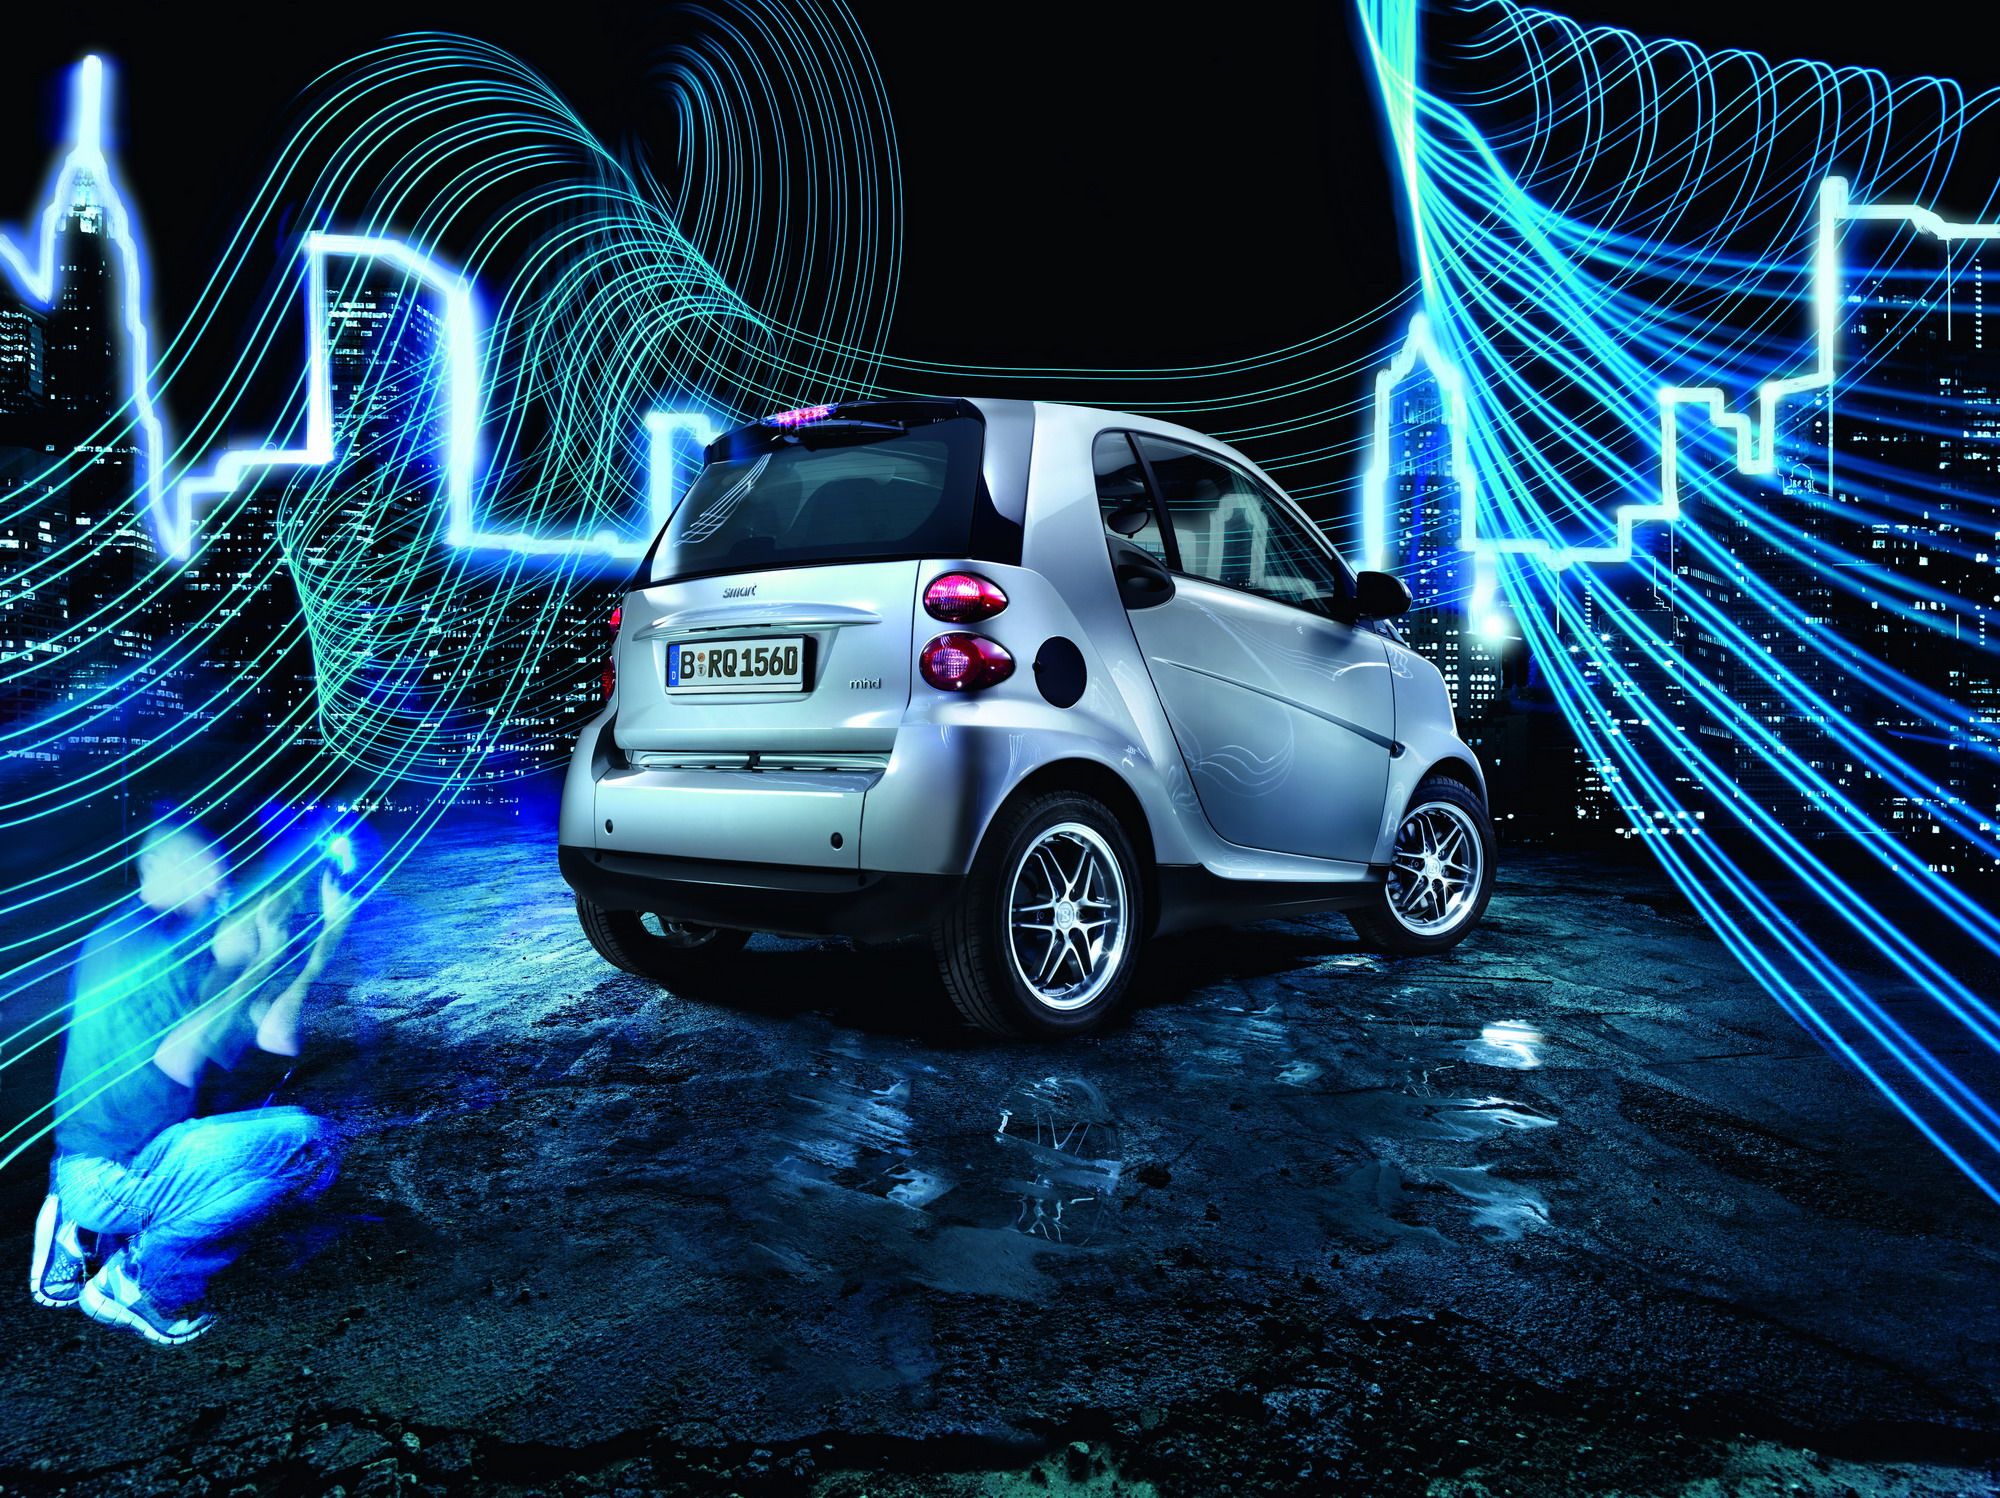 2011 Smart Fortwo Limited Silver Edition